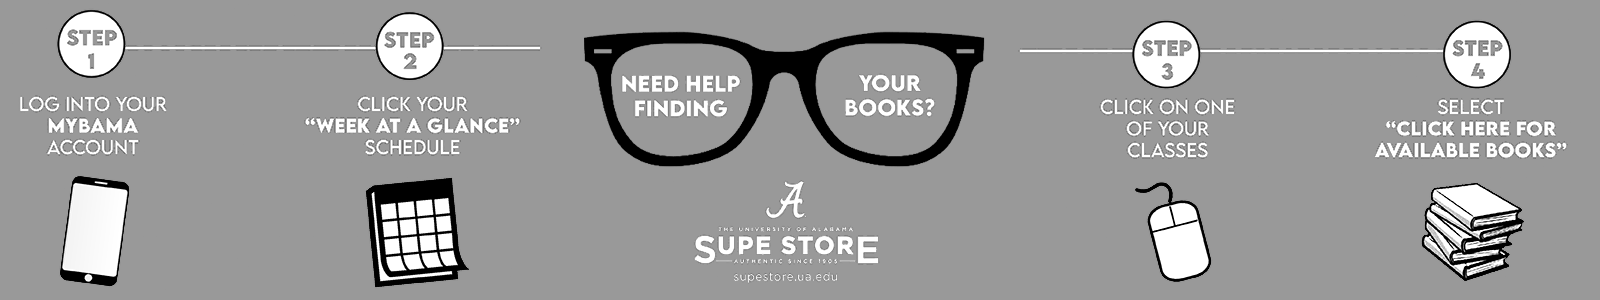 Let us help you find your books